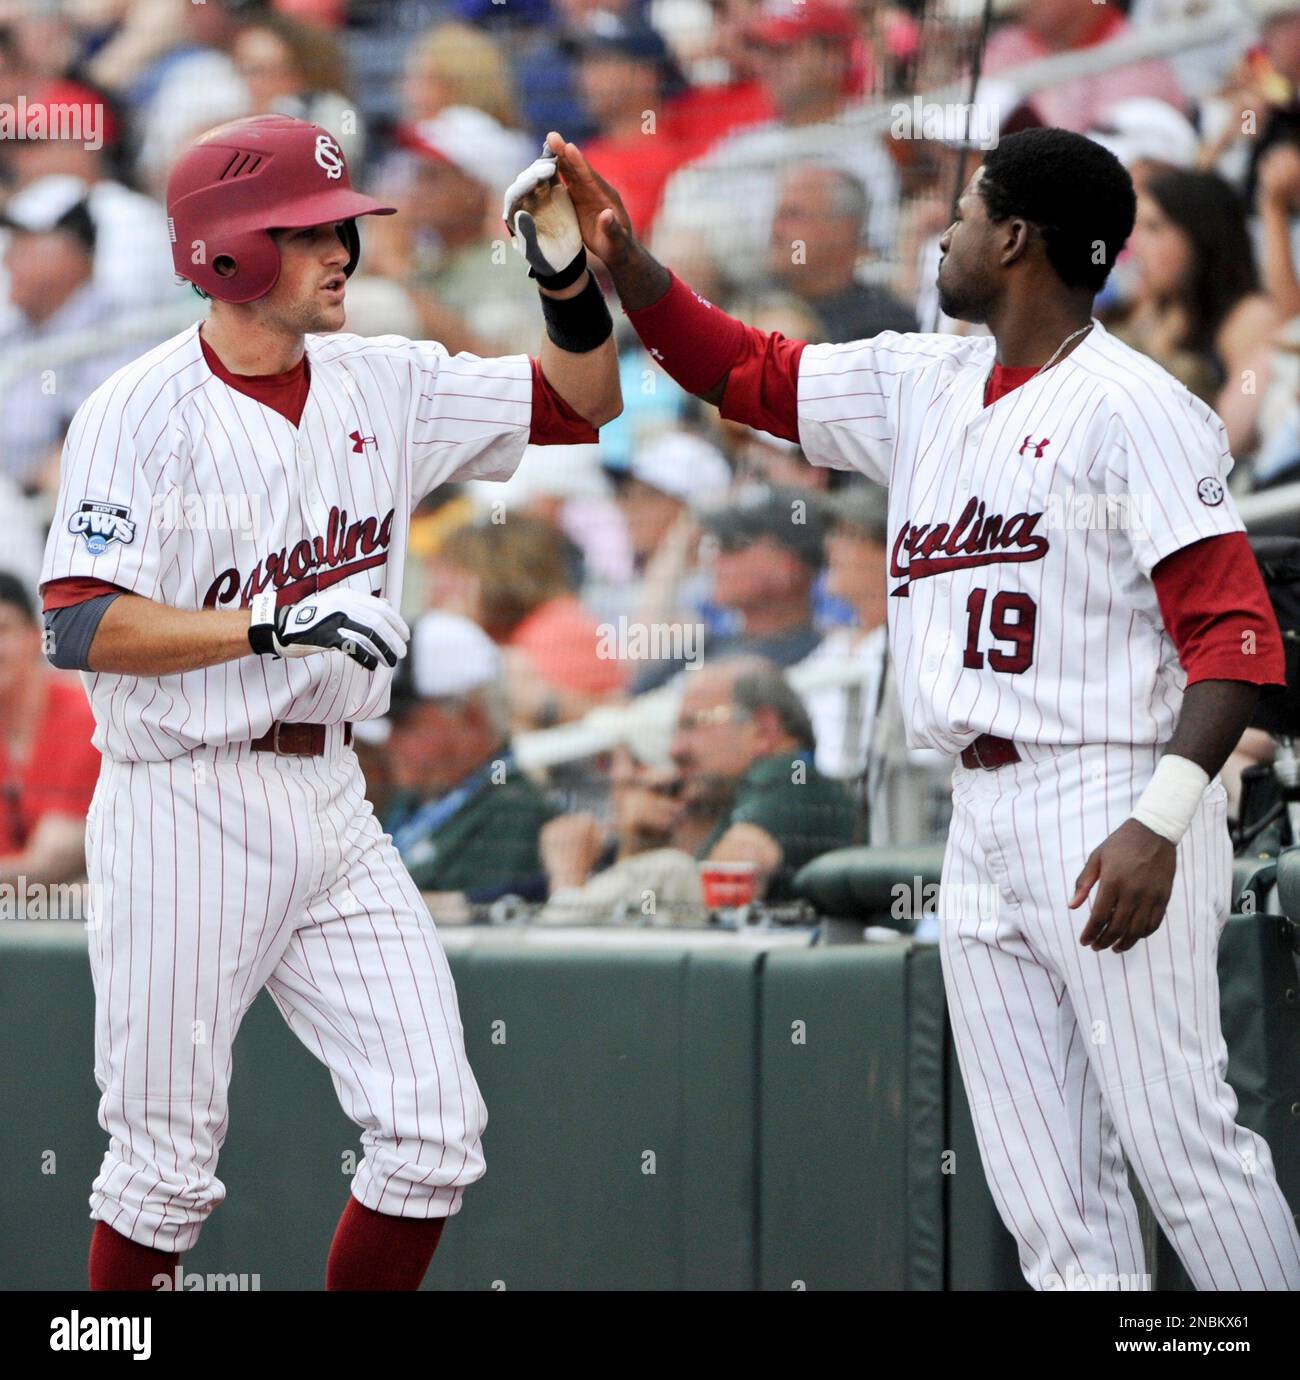 South Carolina's Scott Wingo, left, exchanges high fives with teammate Jackie  Bradley, Jr., after Wingo scored against Texas A&M on a throwing error in  the first inning of an NCAA College World